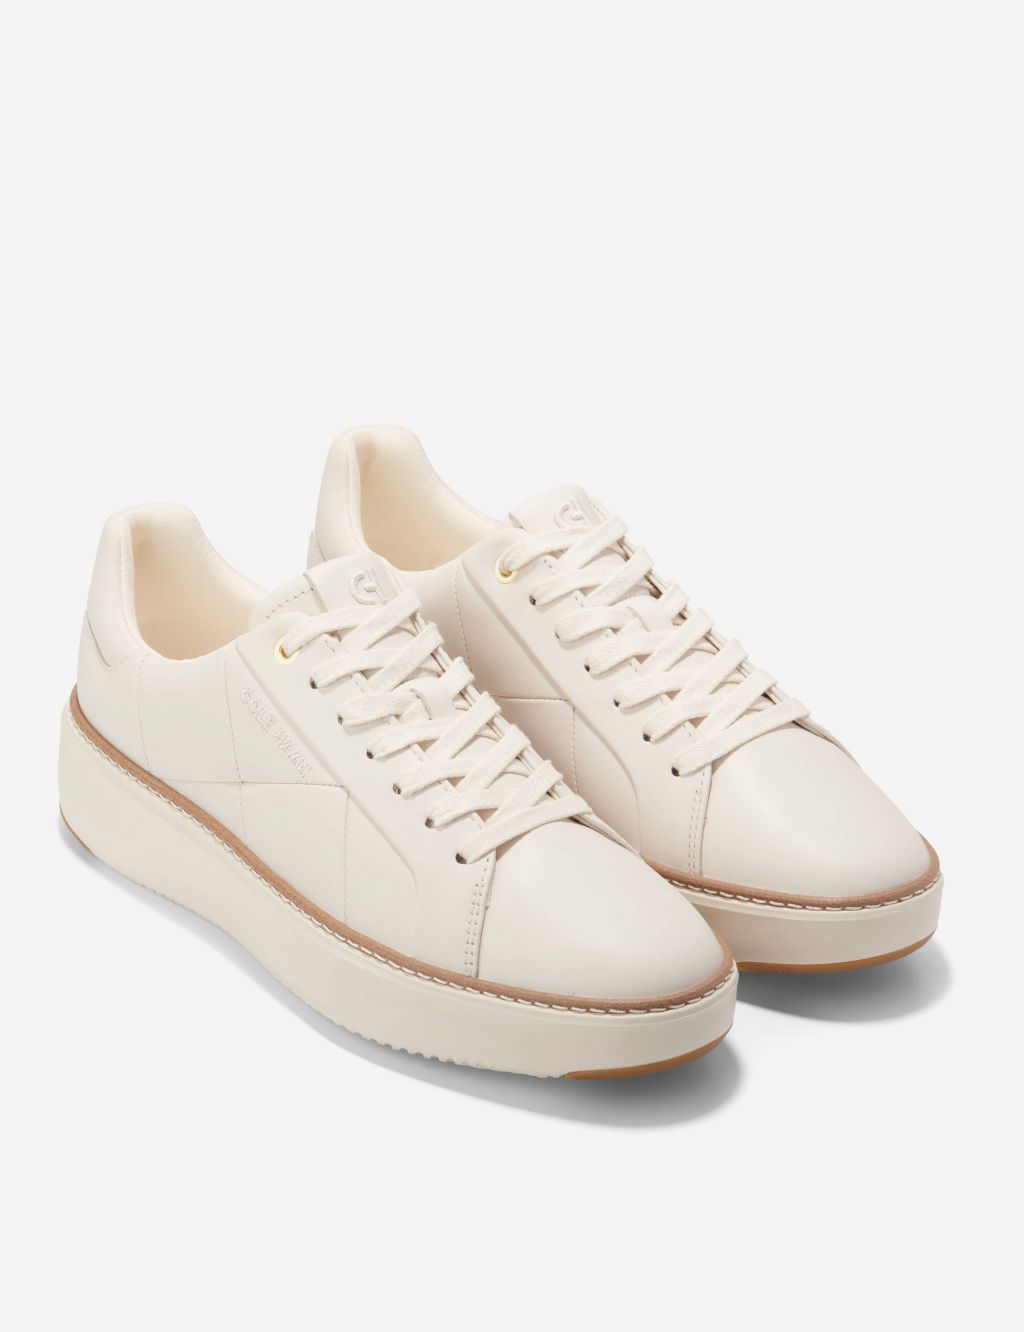 GrandPro Topspin Leather Flatform Trainers 1 of 5